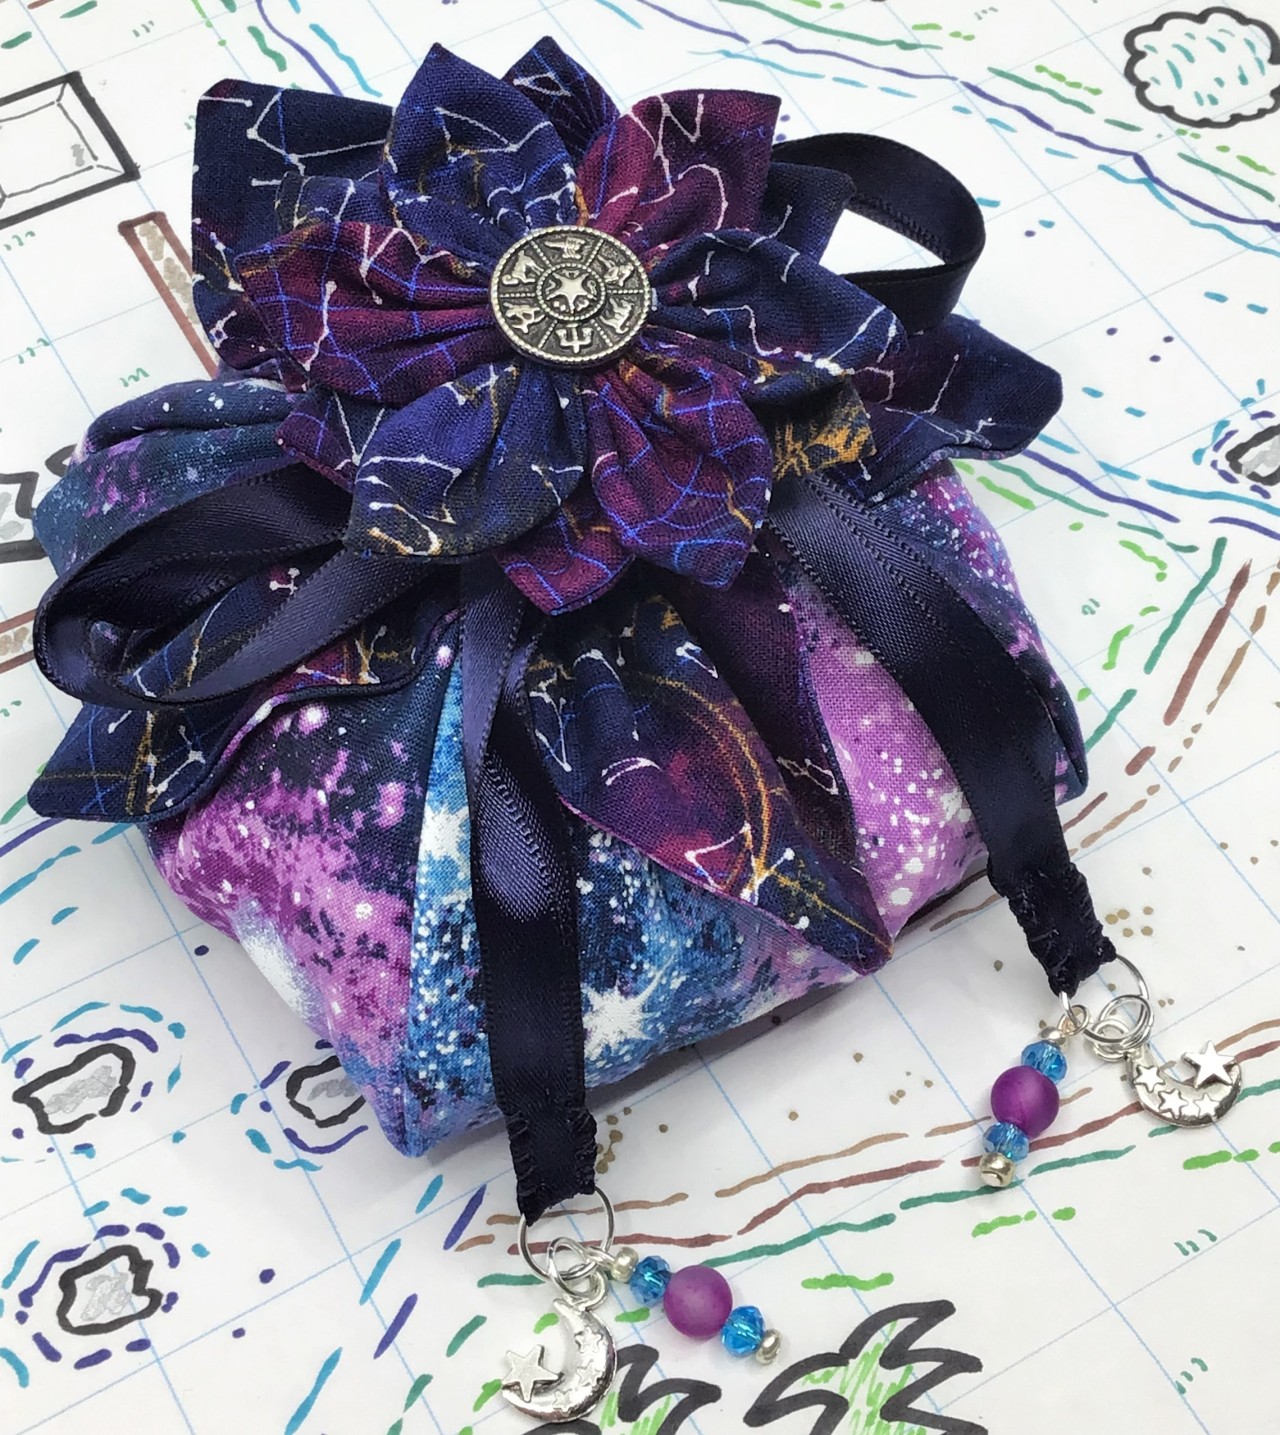 Stock Update!The “Onwards, to Forever and Beyond” dice bag has been added to the store!https://www.etsy.com/ca/shop/MagicandStitchcraft #dice#dice bag#dnd #dungeons and dragons #ttrpgs#dice storage#dice tray#space#stars#nebula